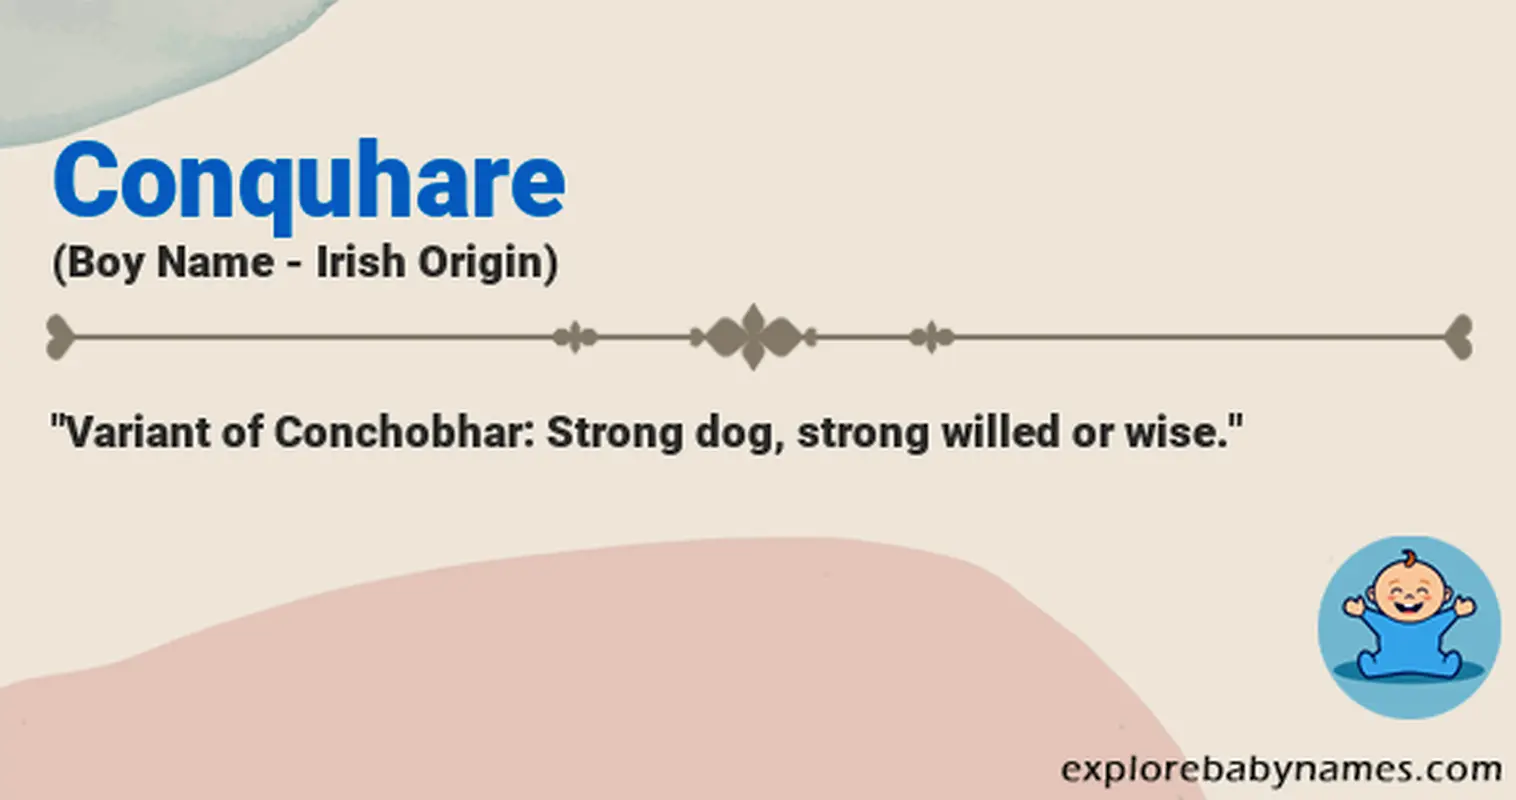 Meaning of Conquhare